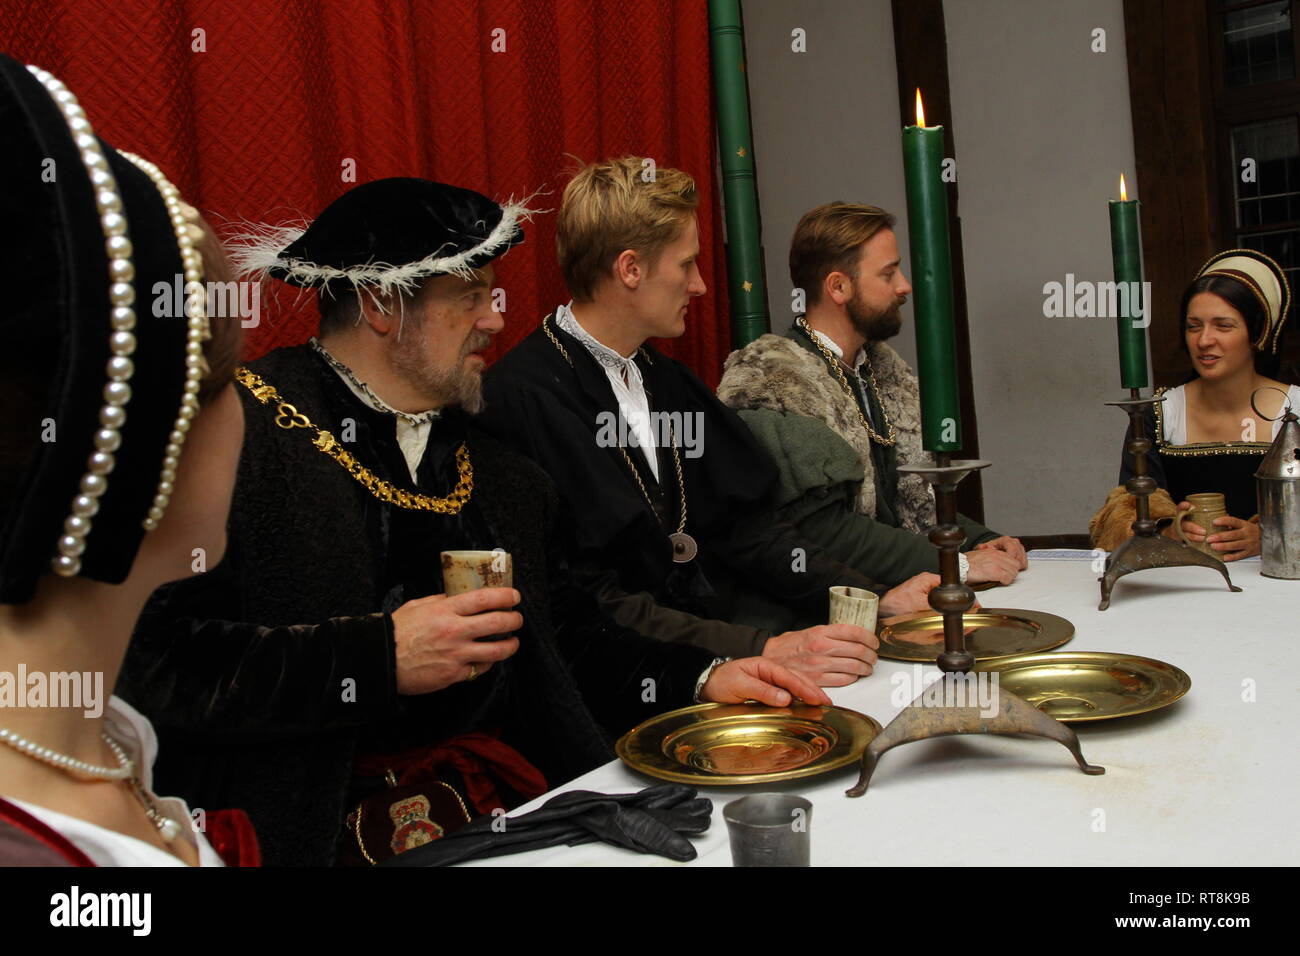 Five people dressed in accurate Tudor dress are having a banquet at The Tower of London. Henry VIII and Anne Boleyn and friends are there. Stock Photo